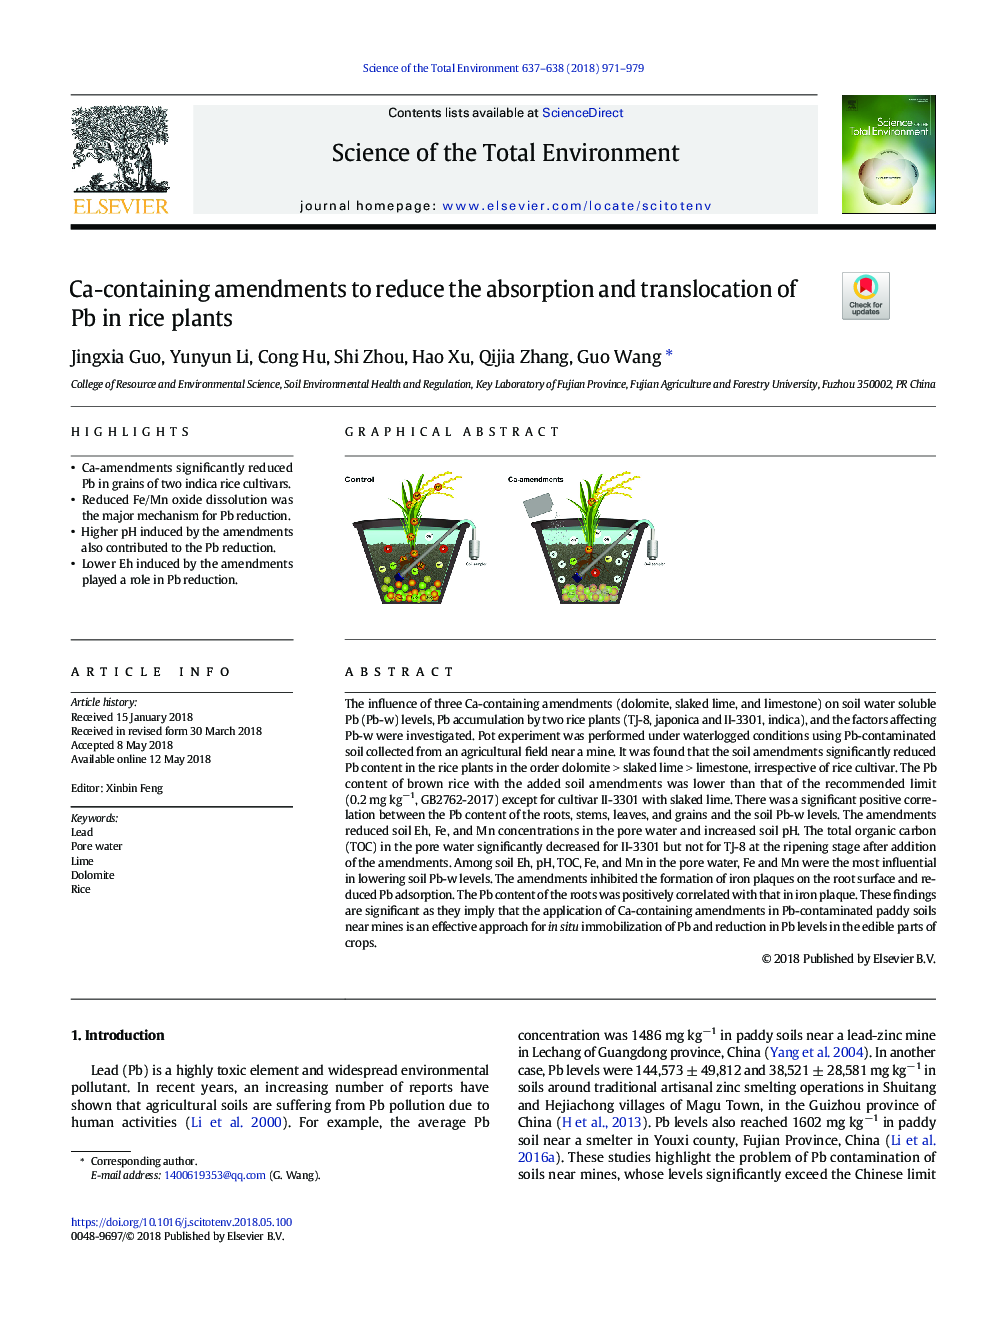 Ca-containing amendments to reduce the absorption and translocation of Pb in rice plants